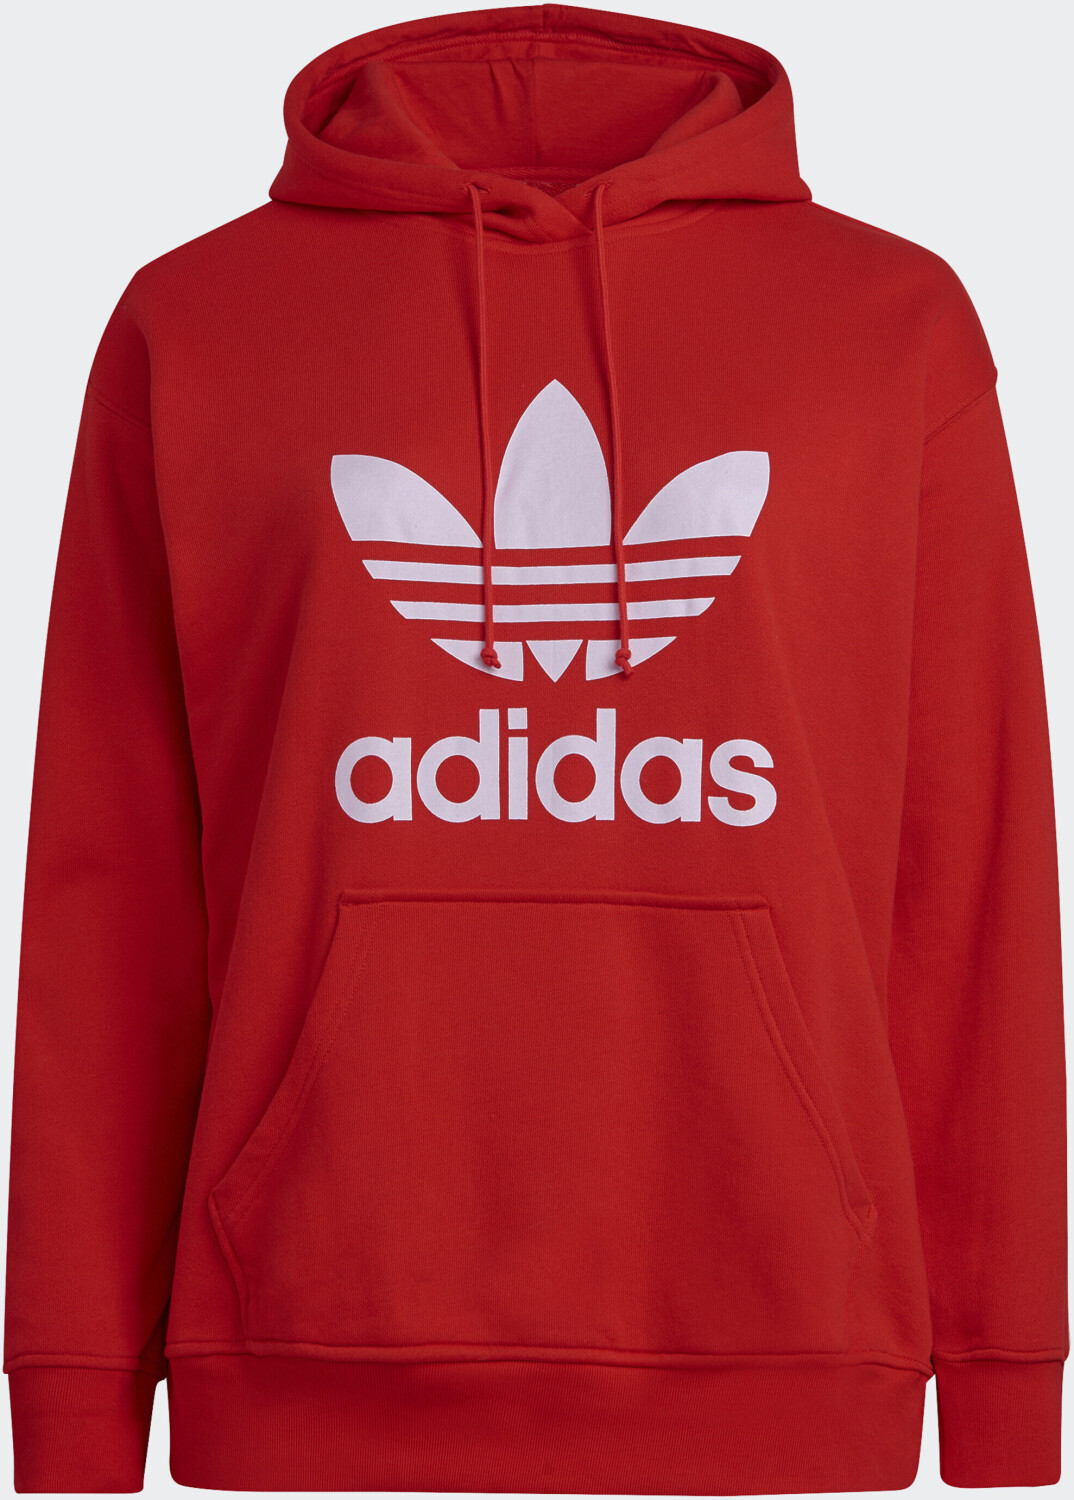 Buy Adidas Trefoil Hoodie Big Sizes red (H22897) from £50.00 (Today ...